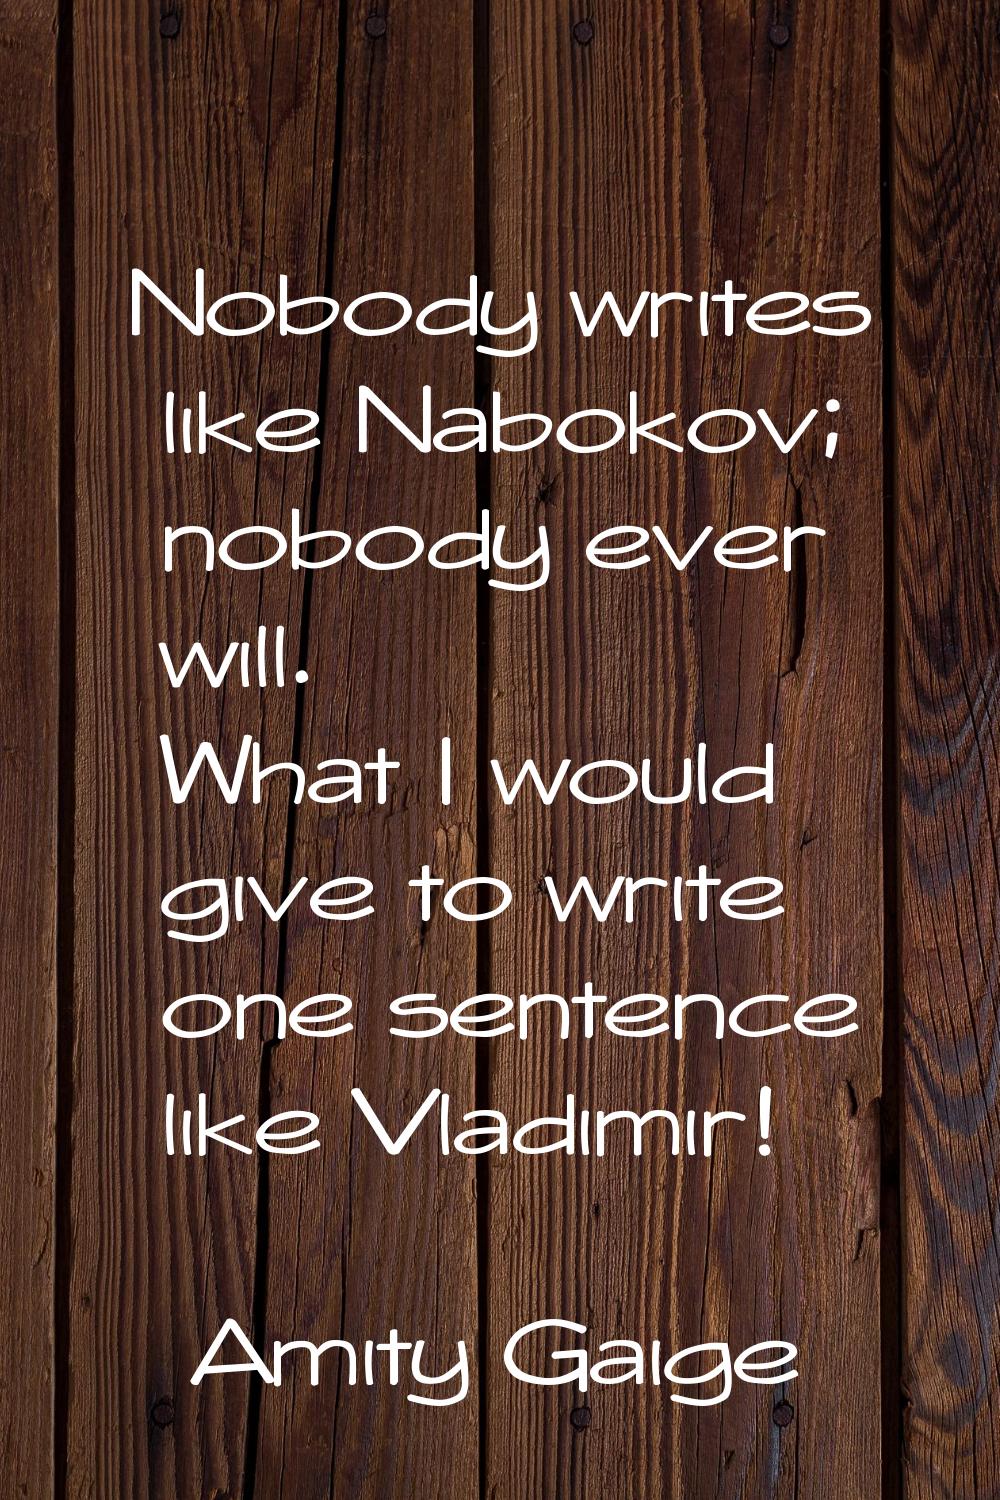 Nobody writes like Nabokov; nobody ever will. What I would give to write one sentence like Vladimir